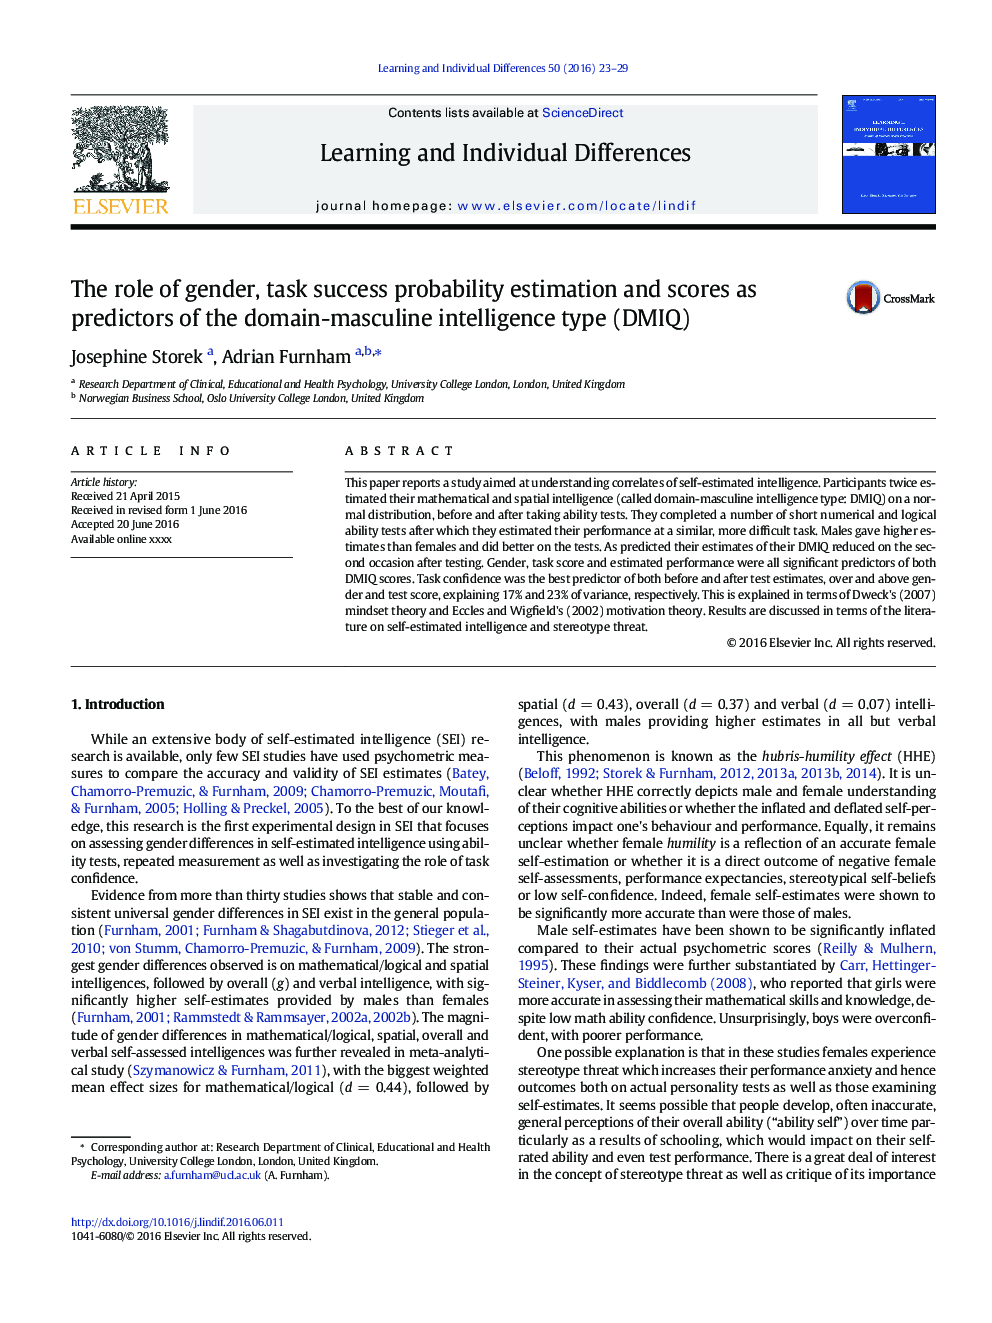 The role of gender, task success probability estimation and scores as predictors of the domain-masculine intelligence type (DMIQ)